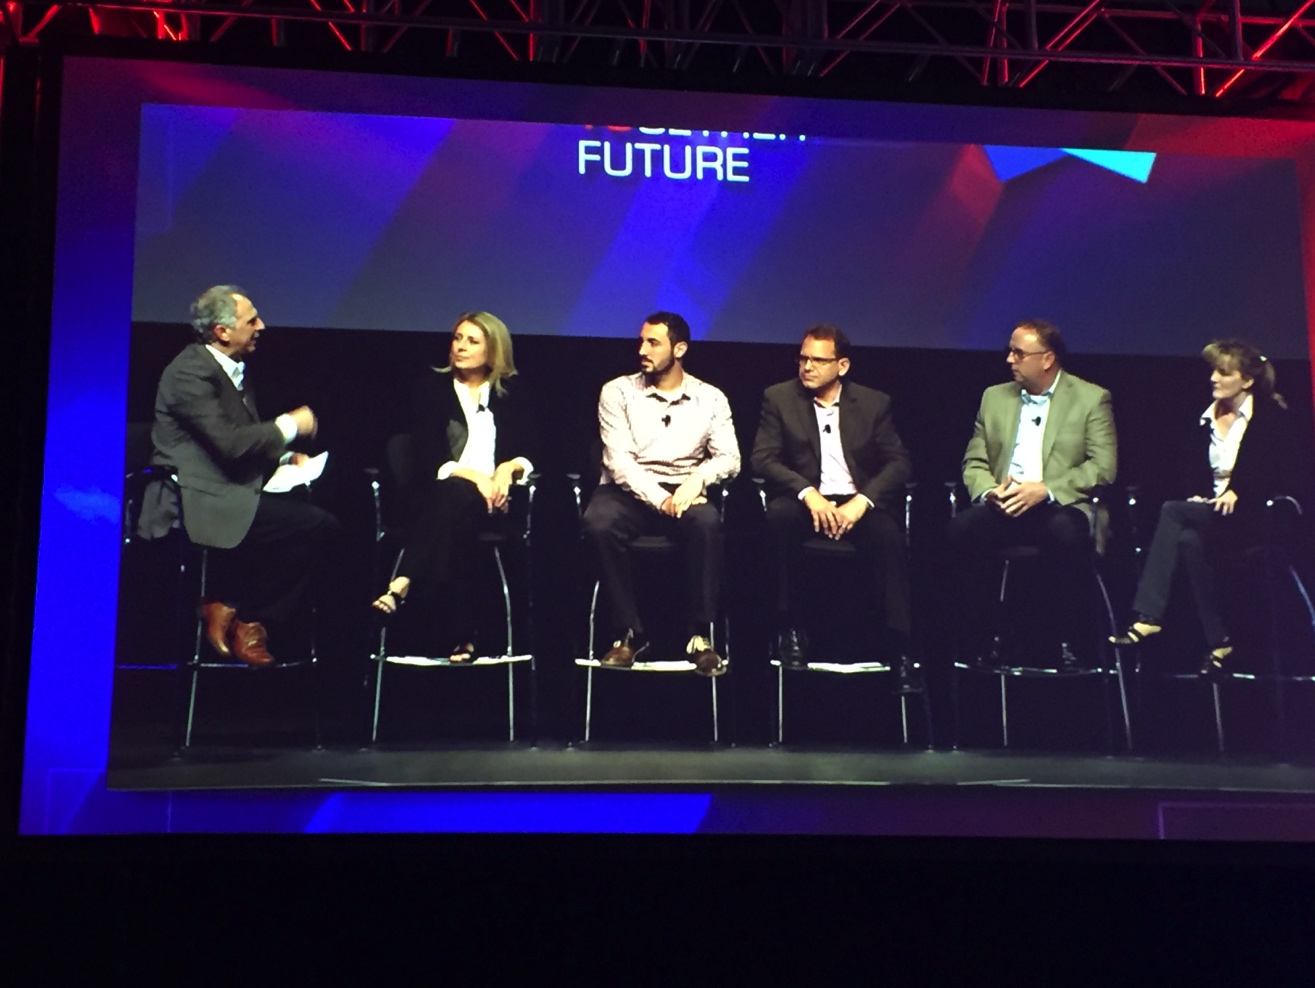 Toshiba customer panel at Toshiba Connect 2016, hosted by Michael Sansolo, Retail Food Expert.